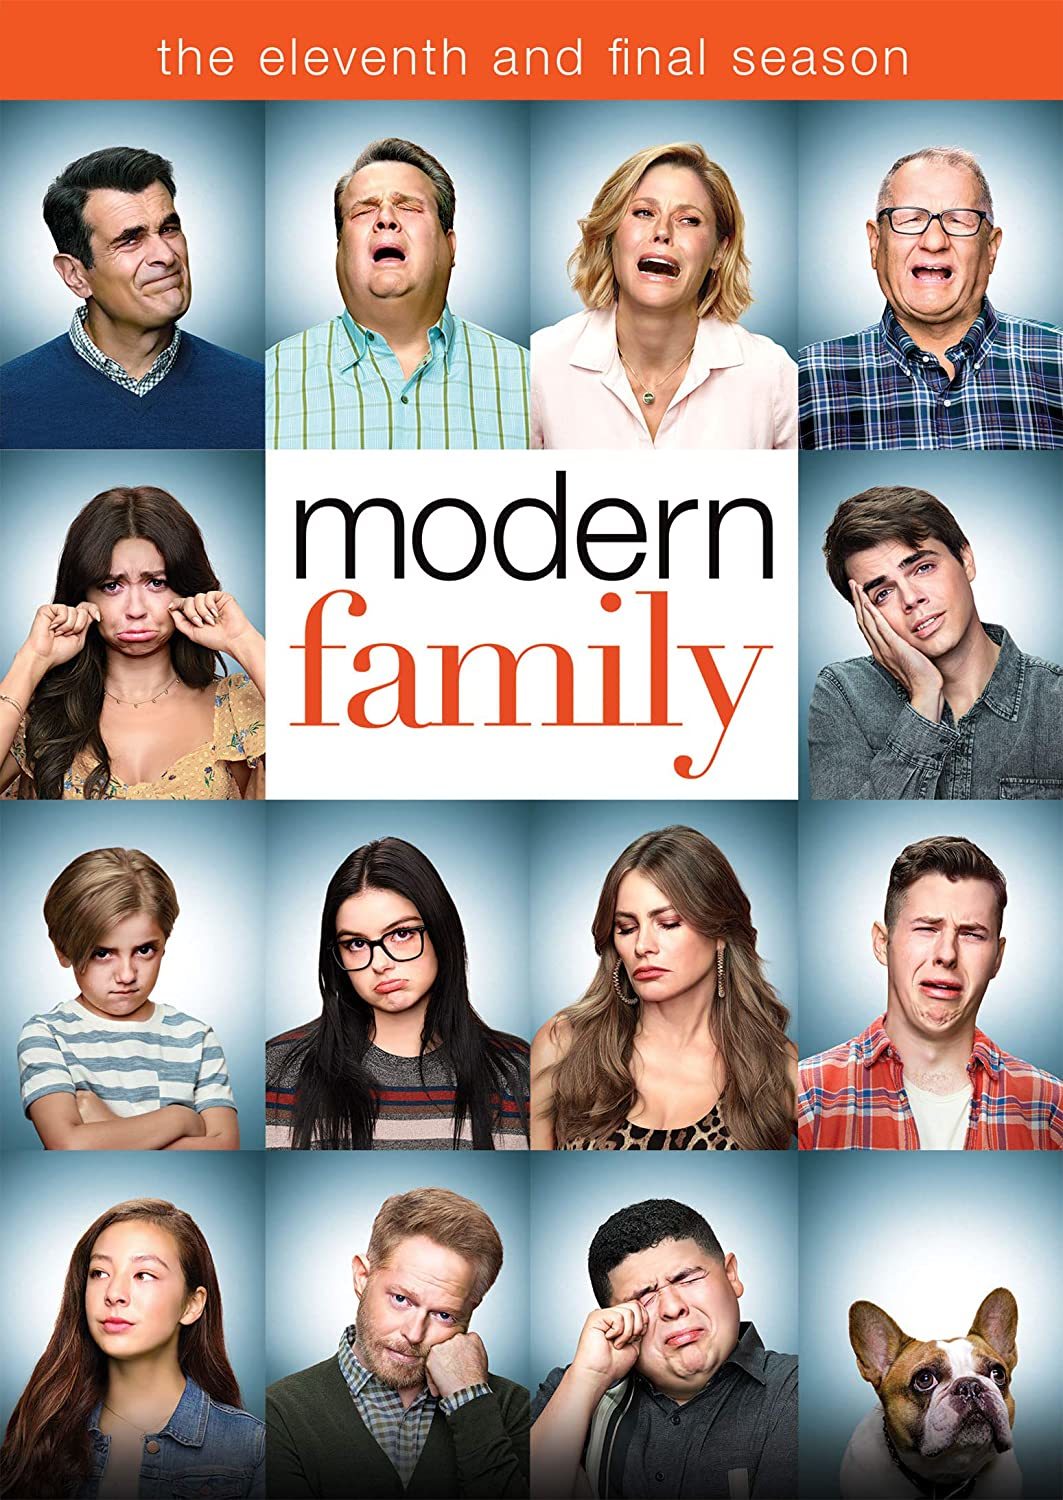 modern-family-s-series-finale-is-a-feel-good-farewell-to-their-audience